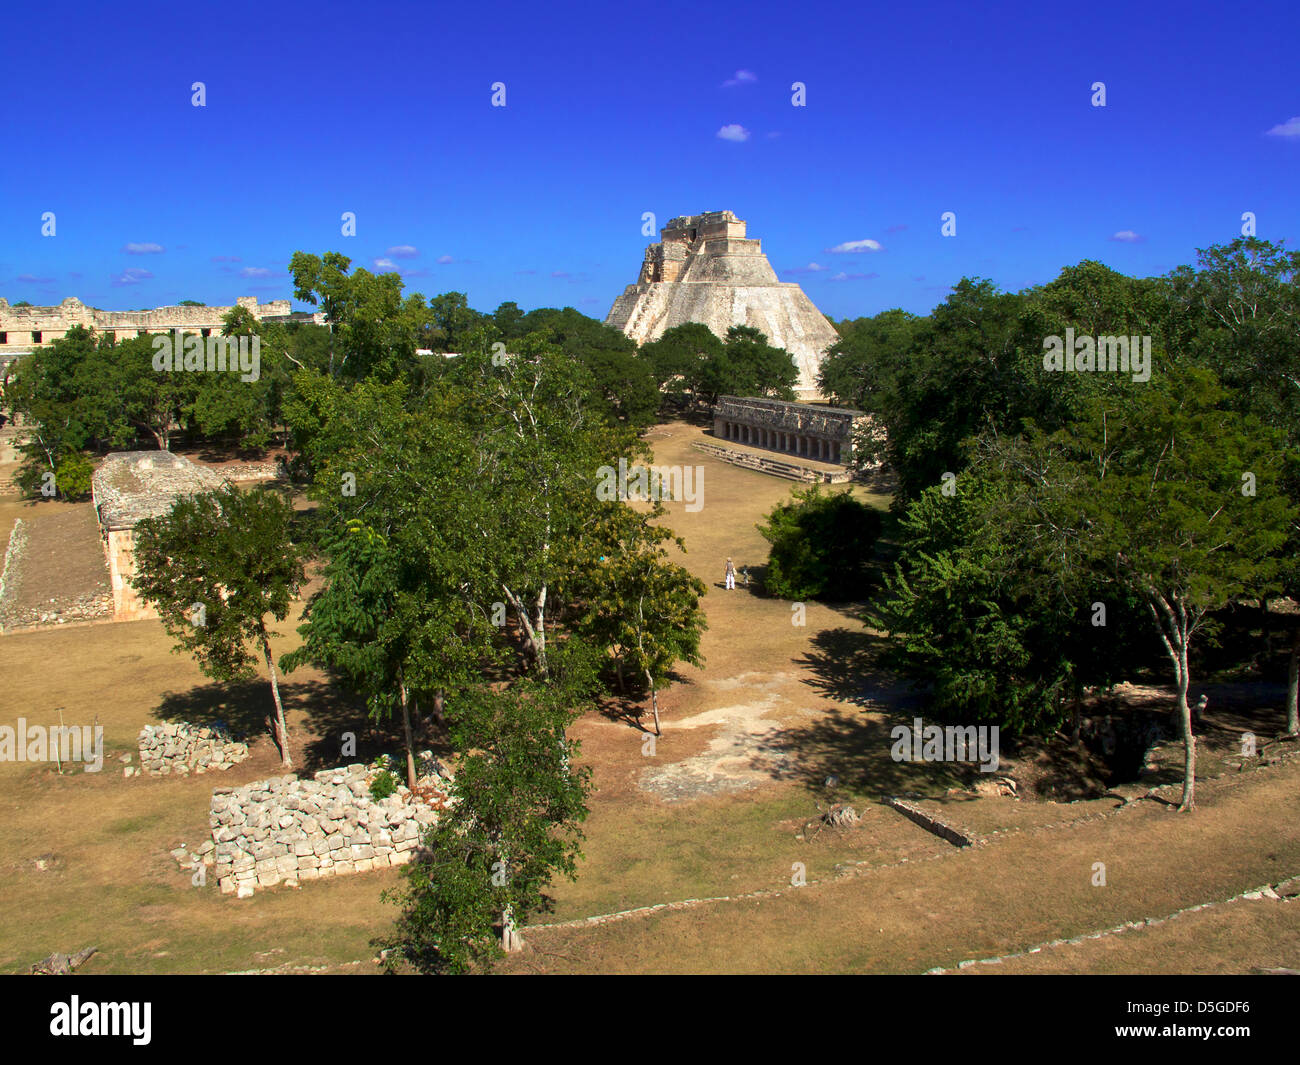 The Mayan ruins of Uxmal in Mexico Stock Photo